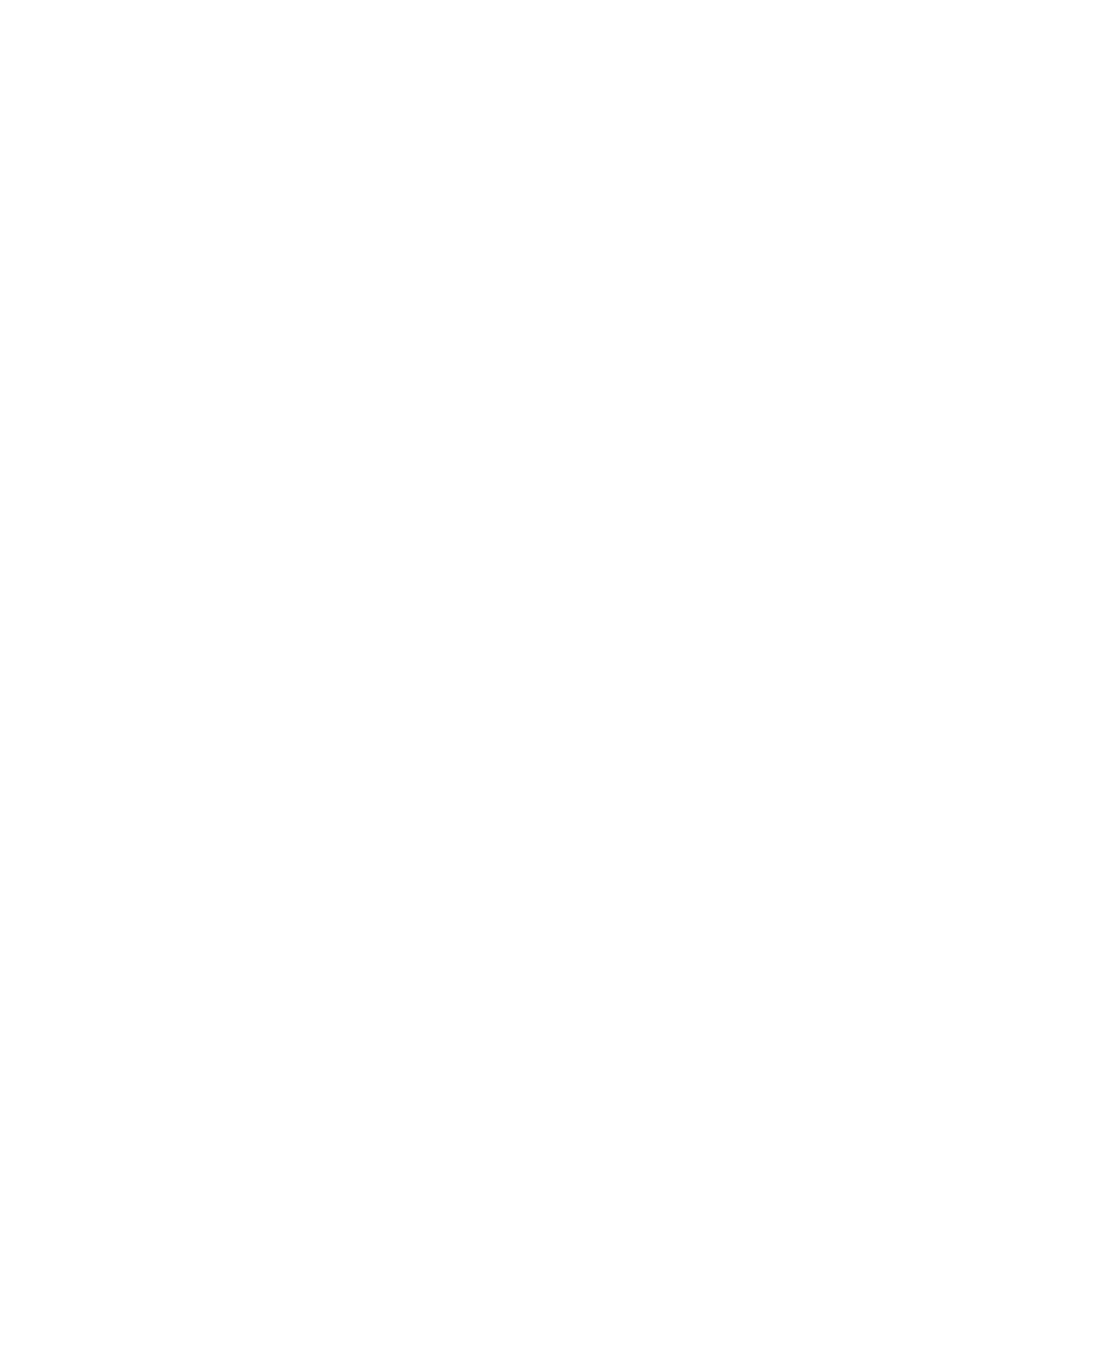 The Meteor